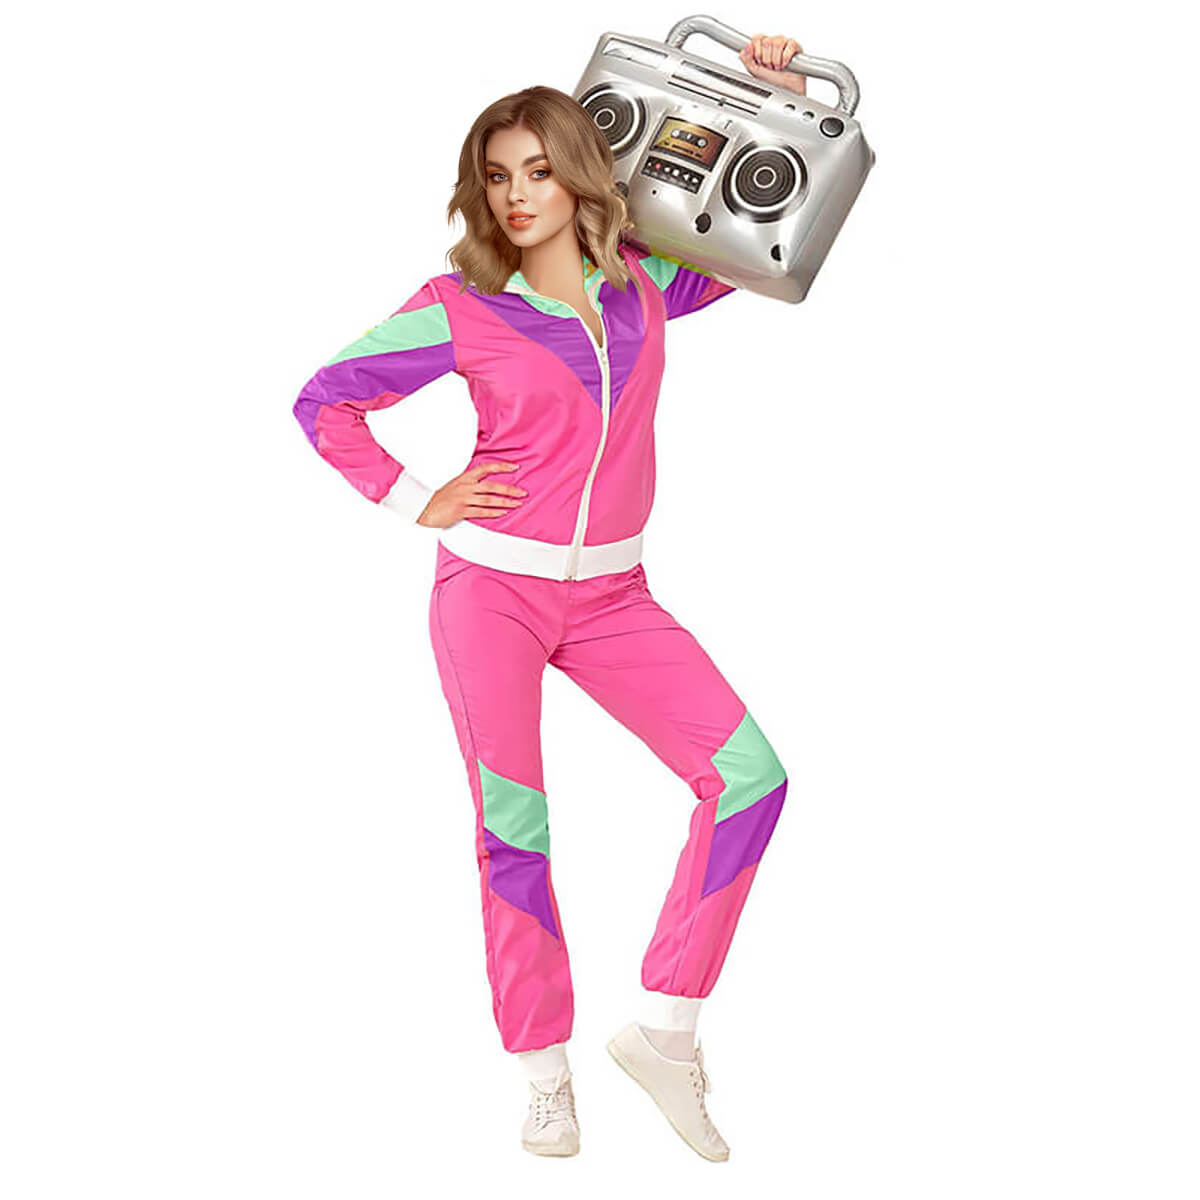 Couples Disco Outfit Adult 70s Hip Hop Street Style Jacket and Pants Women Men Halloween Party Costume